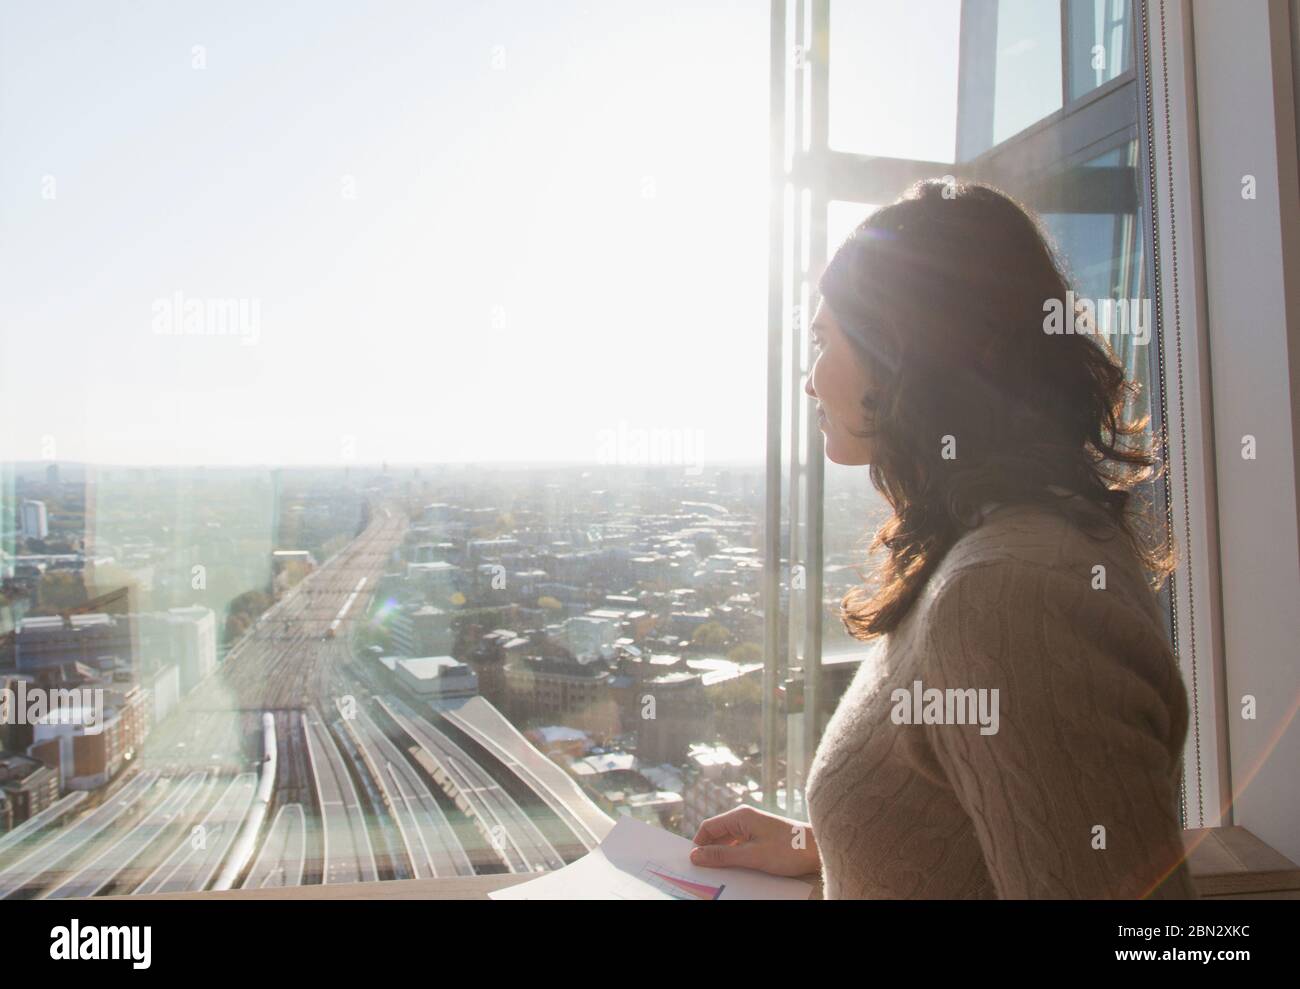 Thoughtful businesswoman at sunny window overlooking city Stock Photo